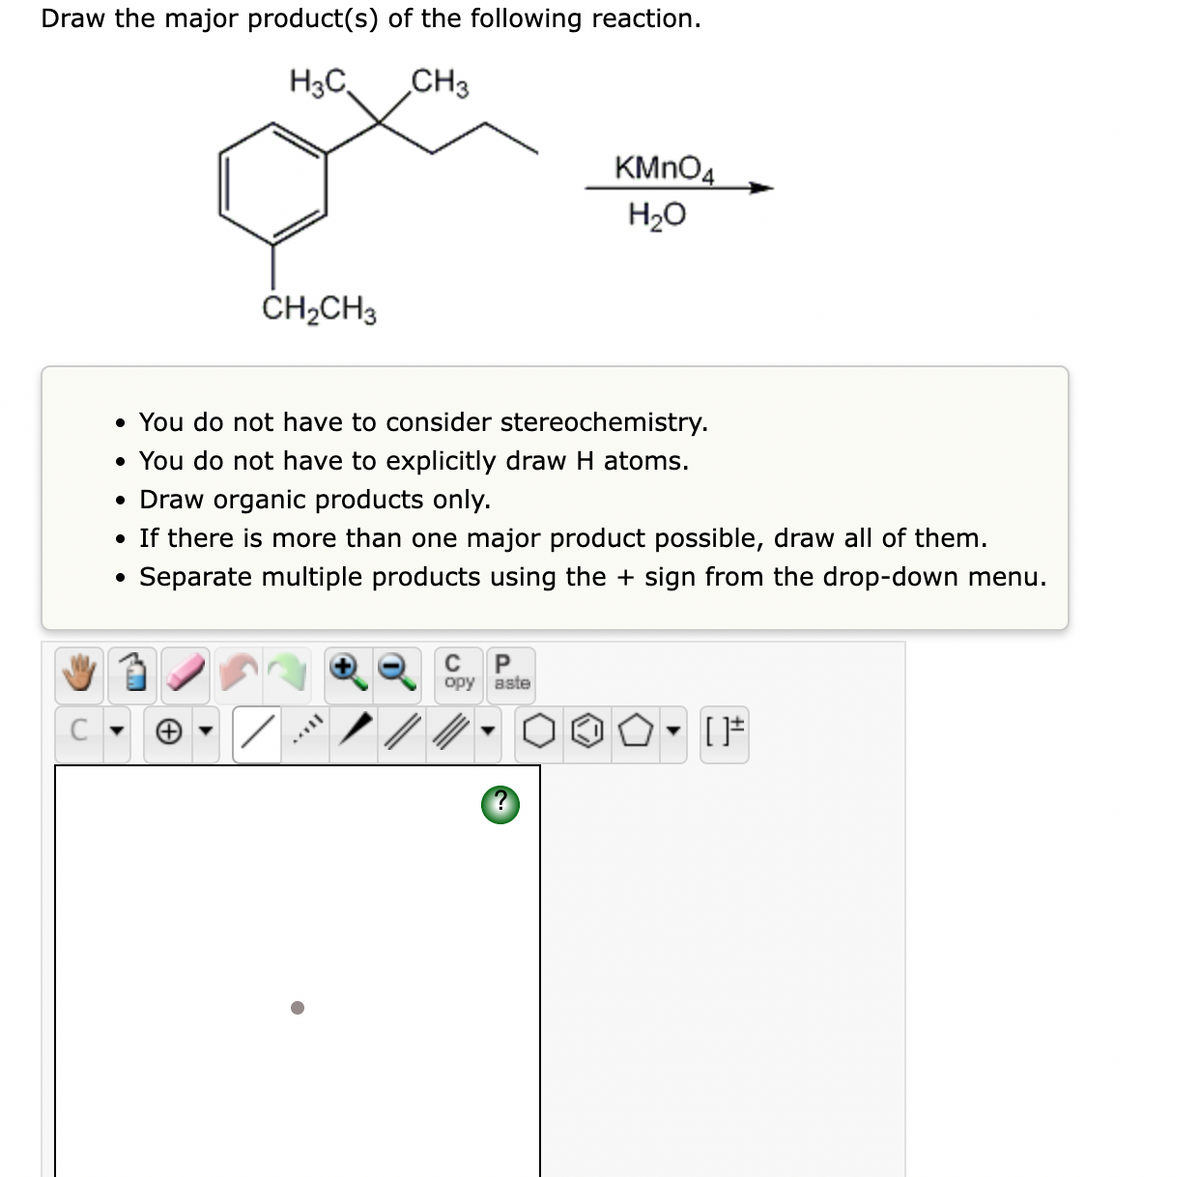 Draw the major product(s) of the following reaction.
H3C,
CH3
KMNO4
H20
CH2CH3
• You do not have to consider stereochemistry.
• You do not have to explicitly draw H atoms.
• Draw organic products only.
• If there is more than one major product possible, draw all of them.
Separate multiple products using the + sign from the drop-down menu.
P
opy aste
